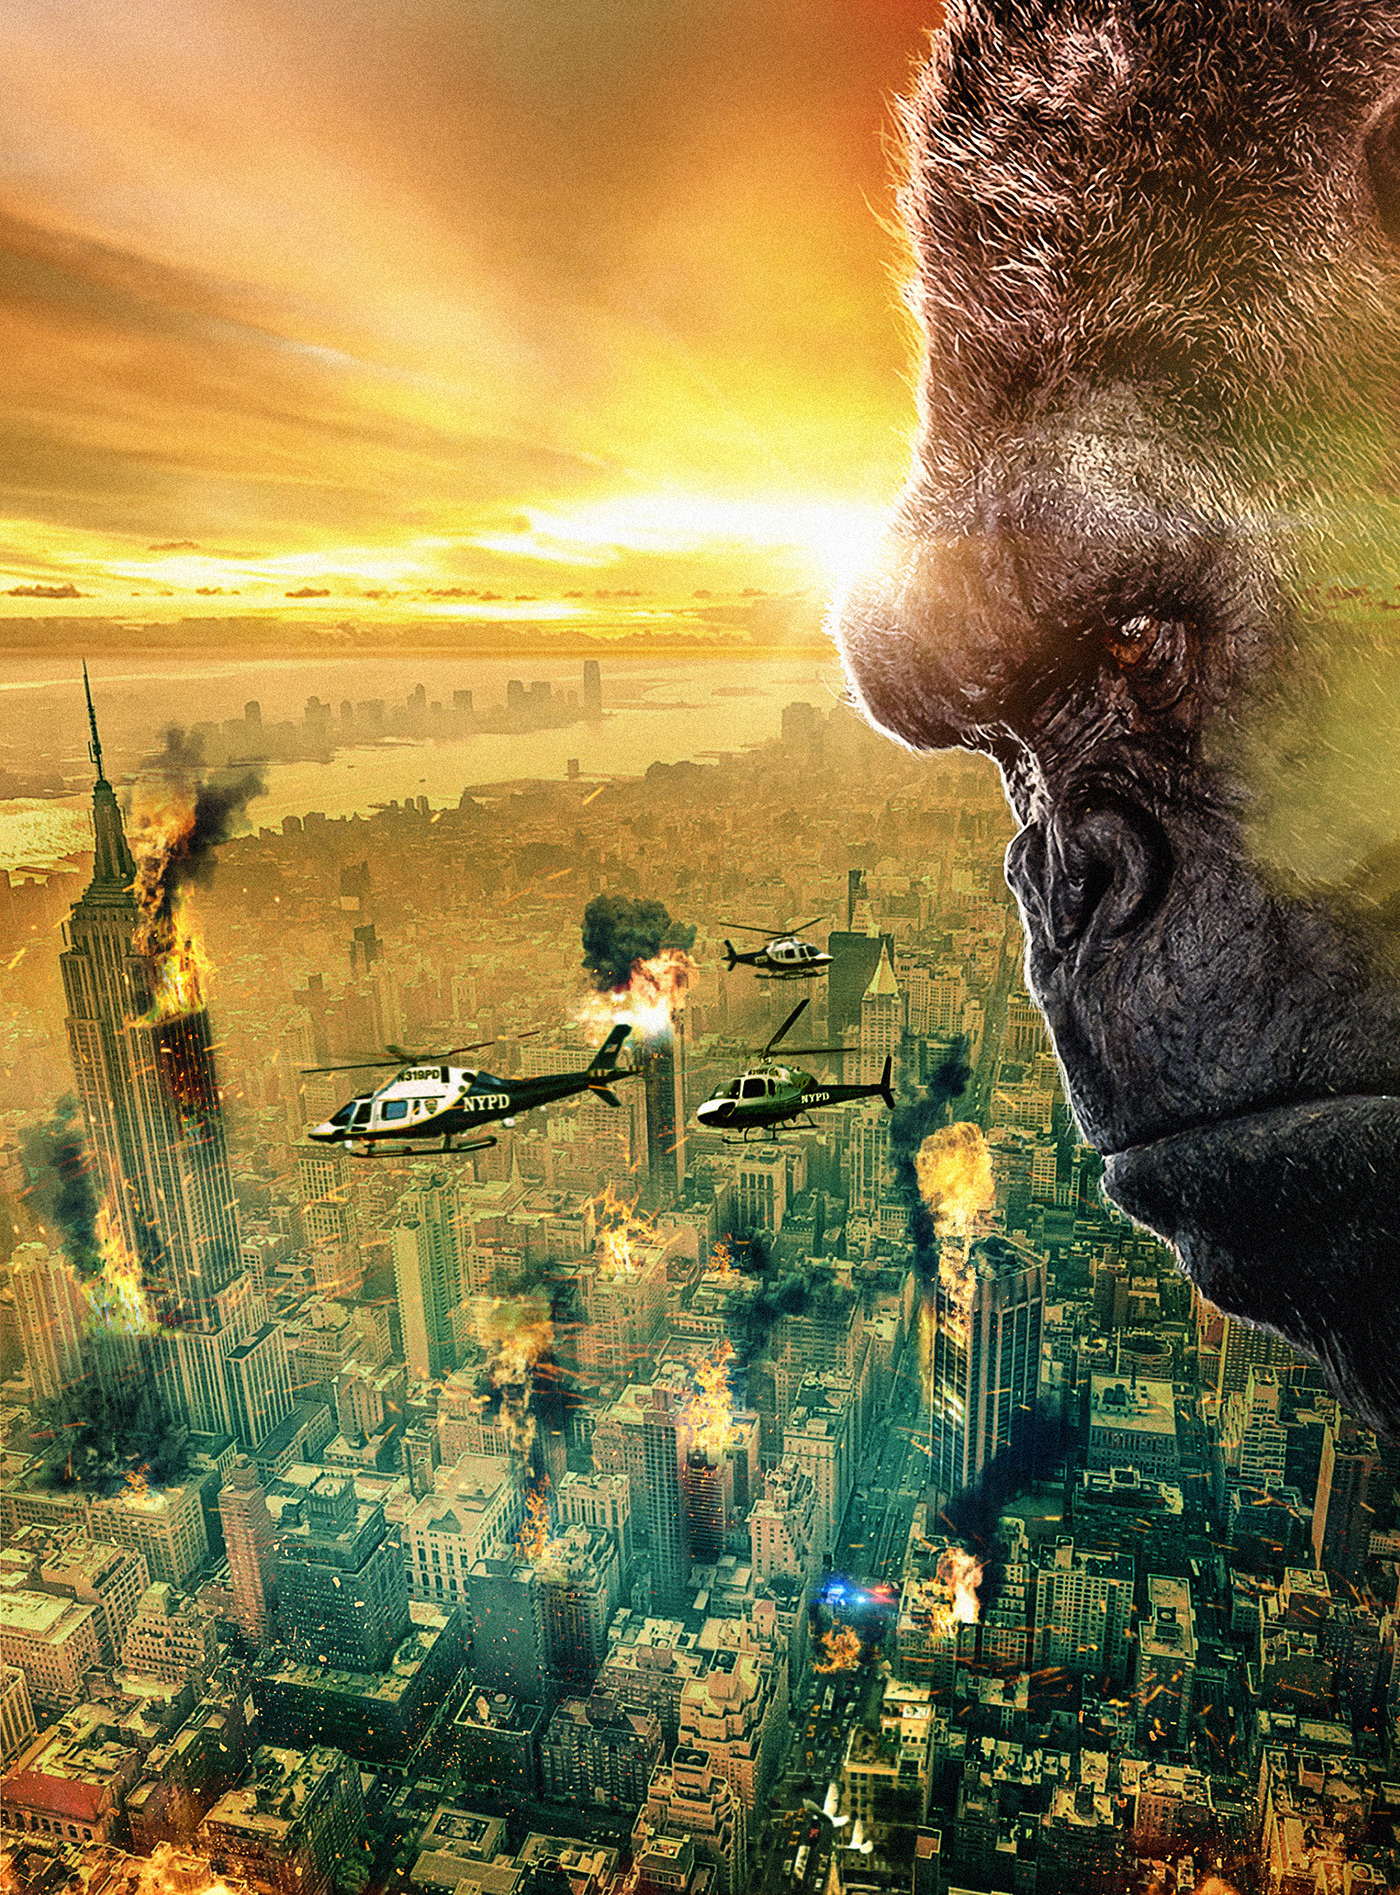 concept art King Kong movie poster Photo Manipulation  photoshop Poster Design retouch ritocco visual art Matte Painting